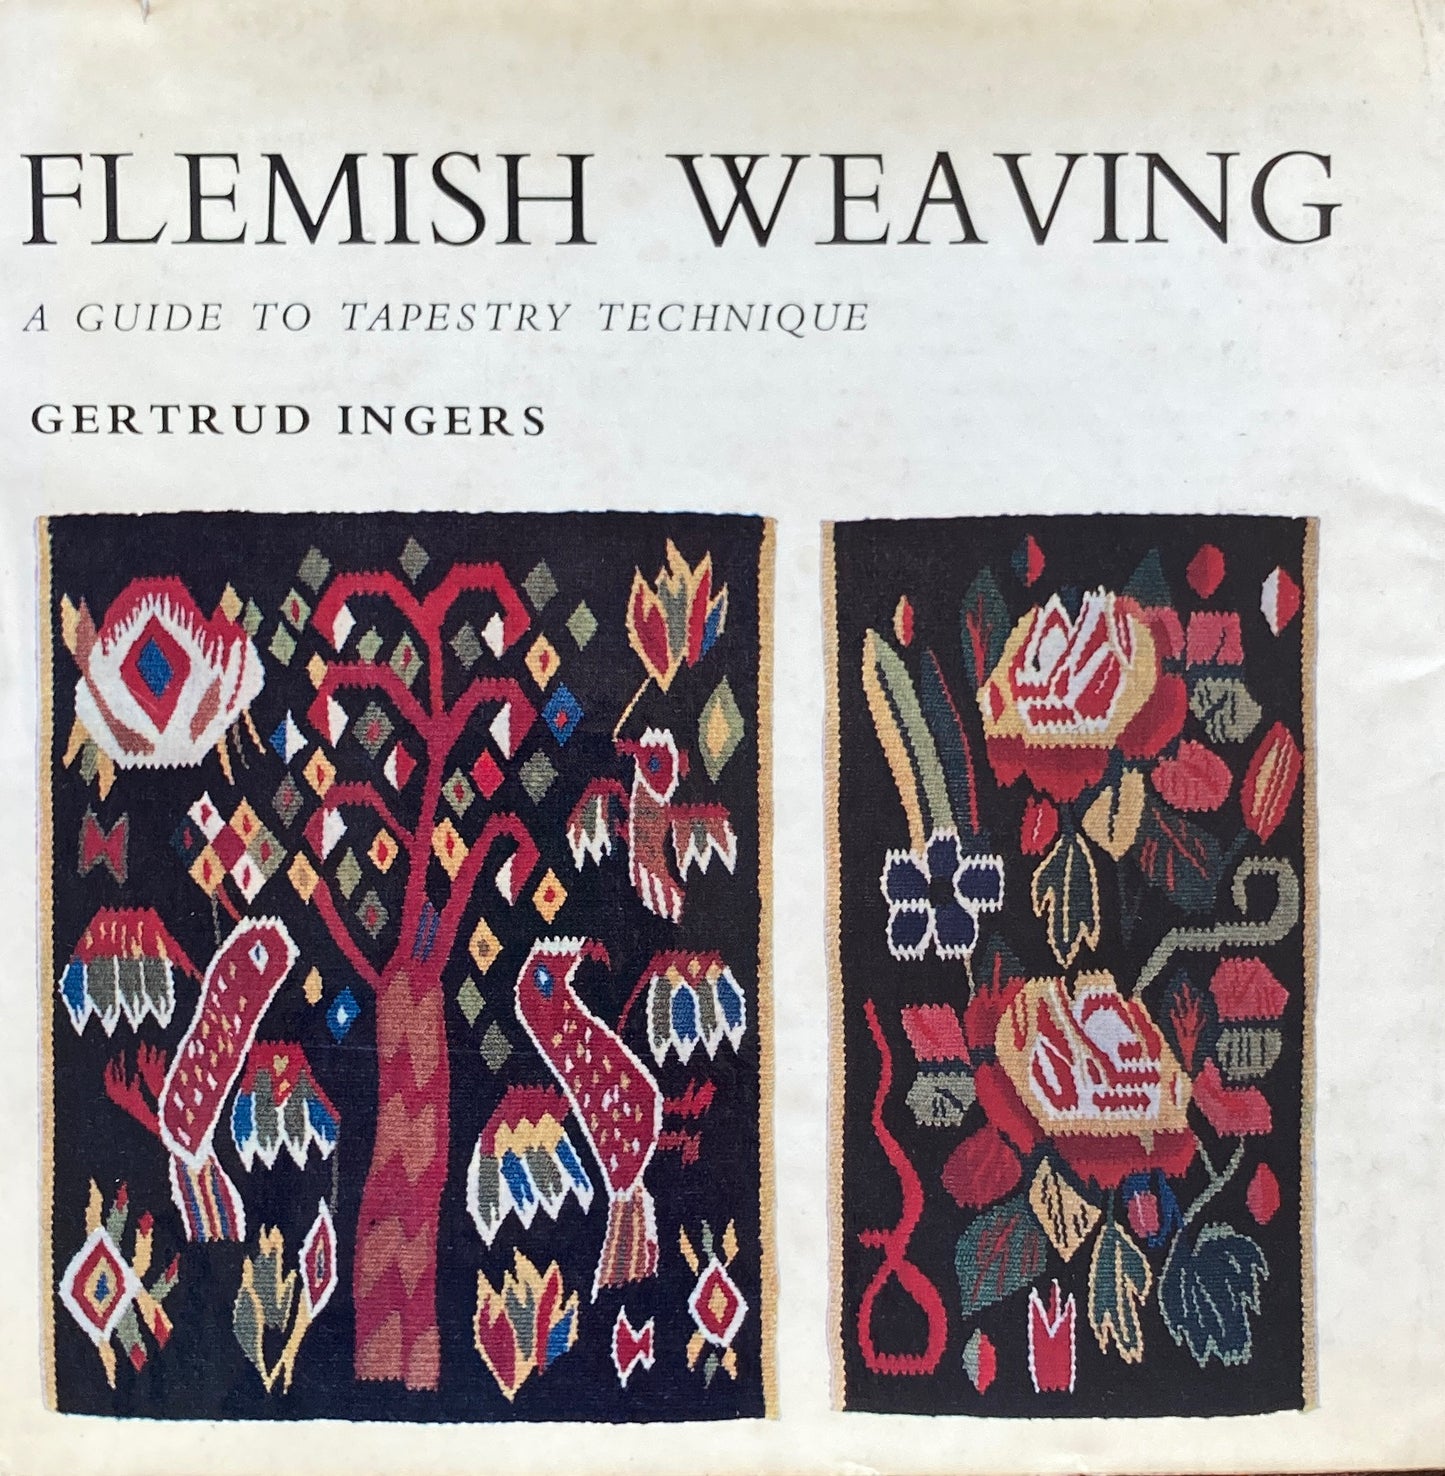 Fremish Weaving A Guide to Tapestry Technique Gertrud Ingers